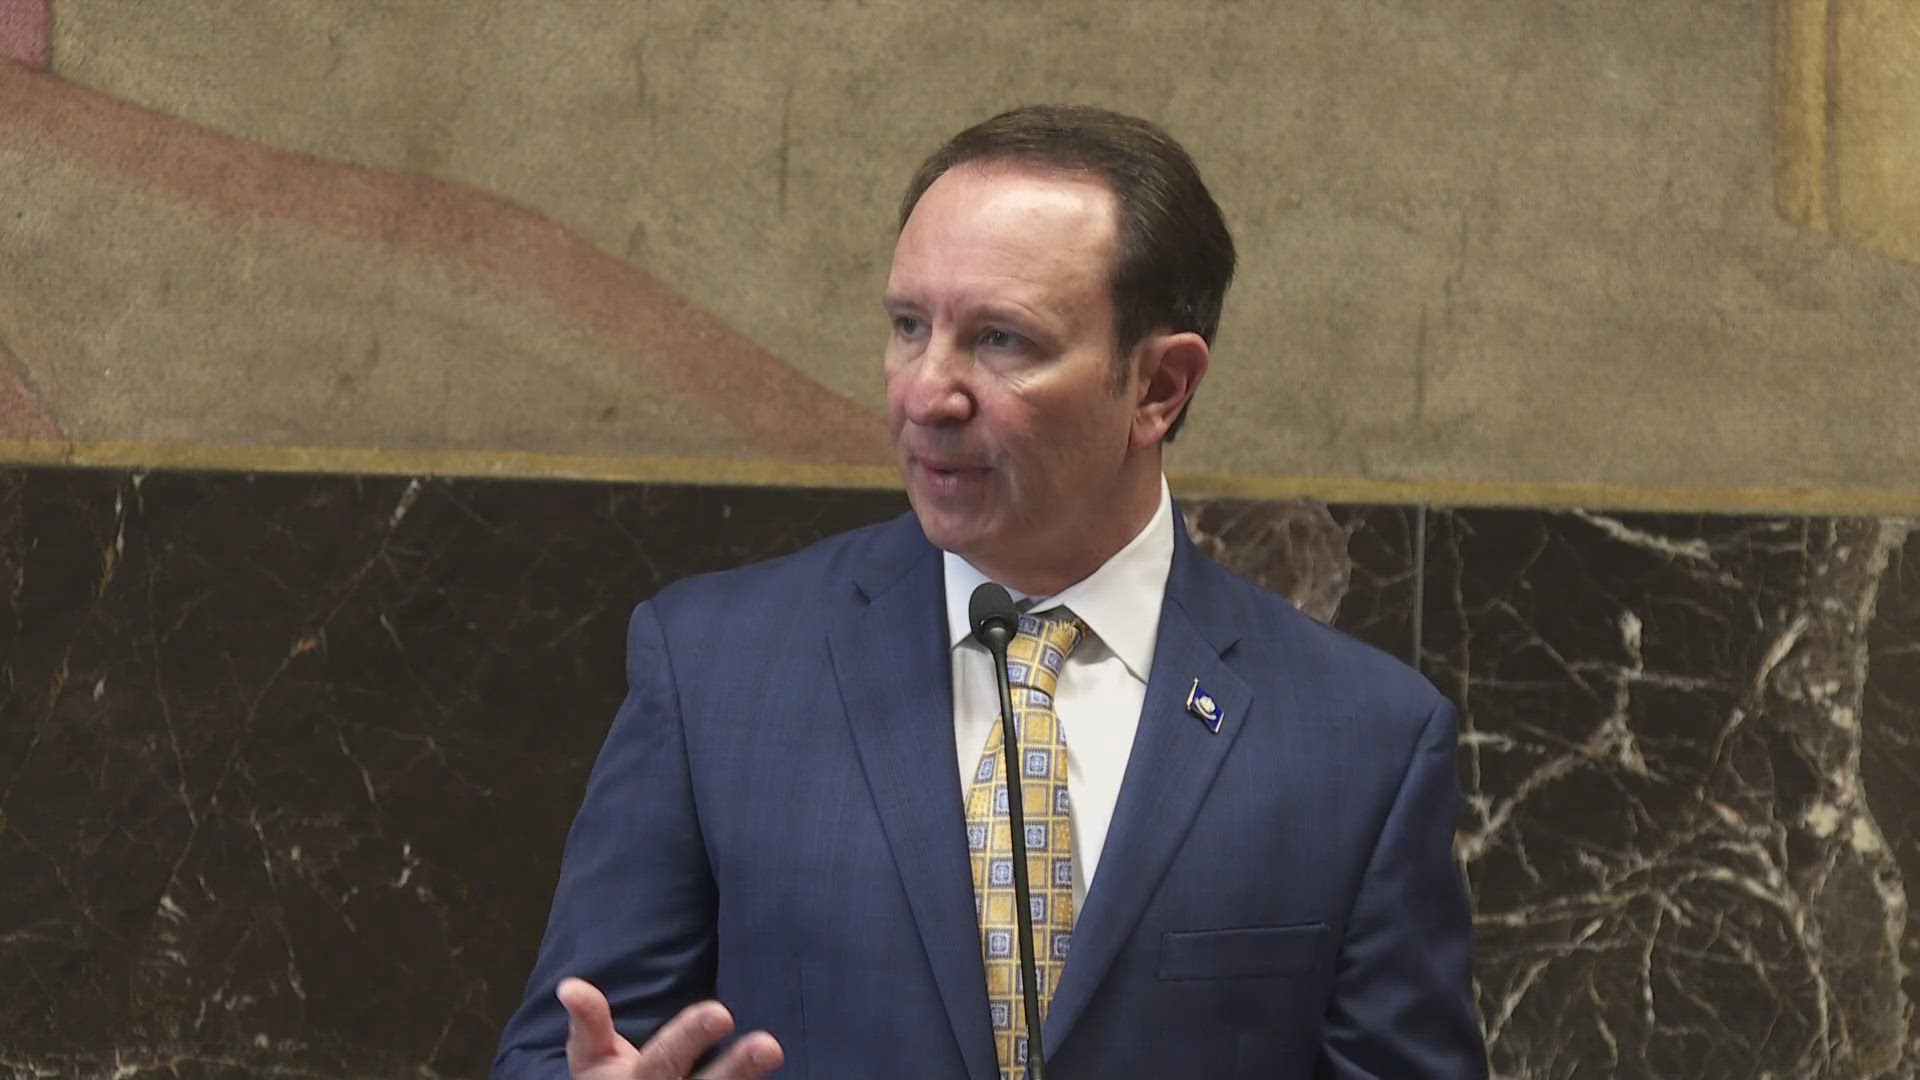 In your Breakdown: Louisiana Governor Jeff Landry is at the U.S. Supreme Court in Washington, for arguments on a lawsuit about social media and free speech.